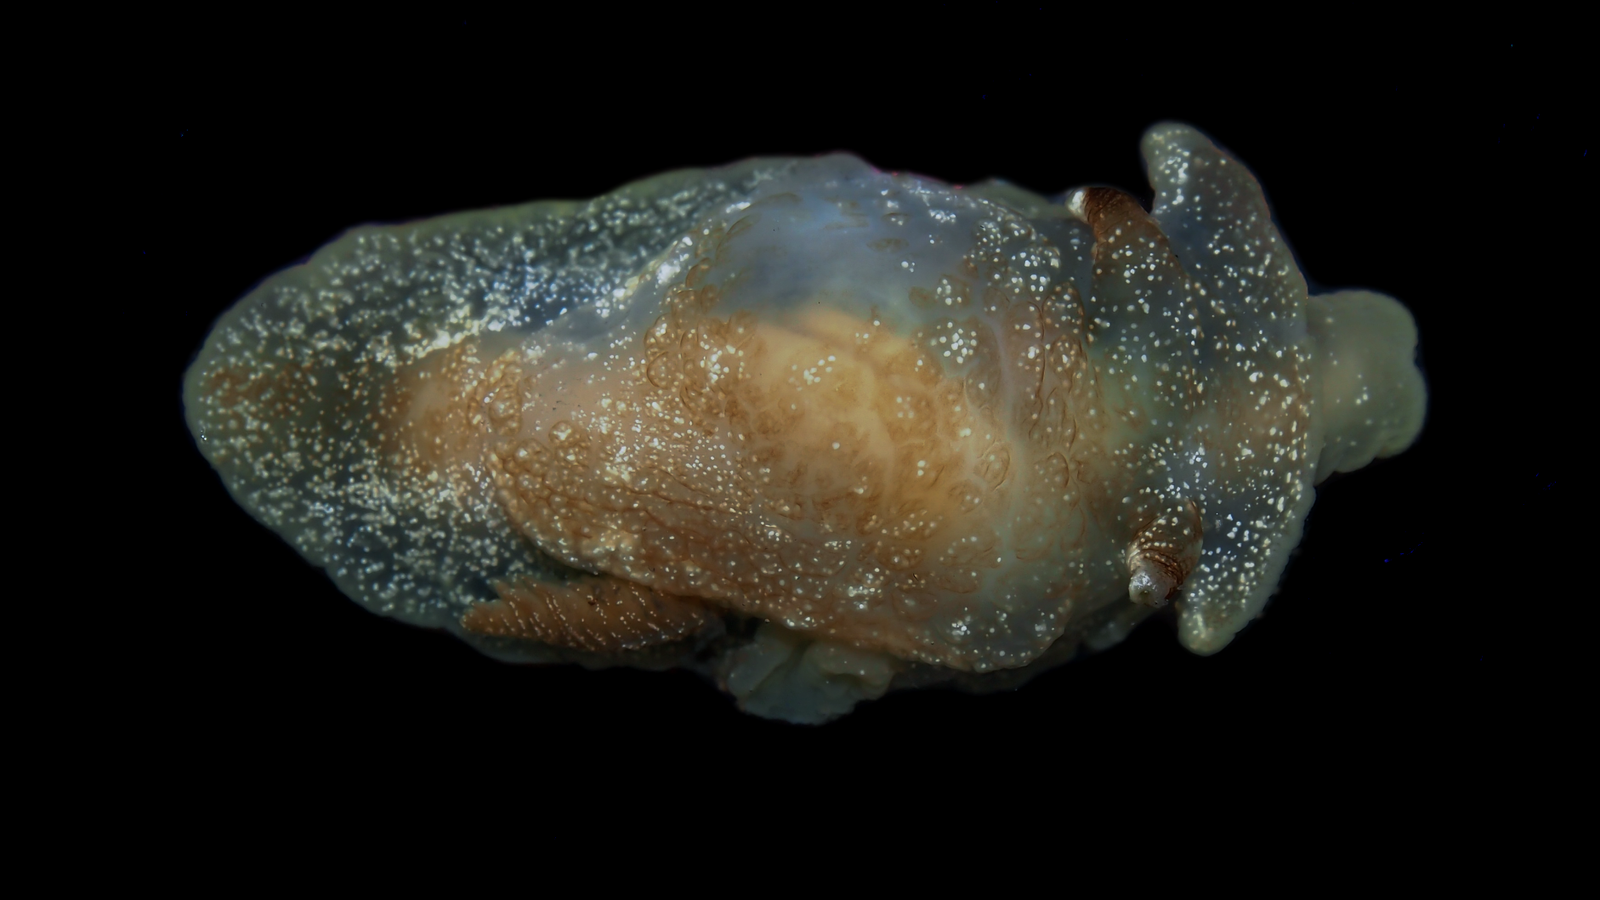 New species of sea creature discovered by scientists in UK waters